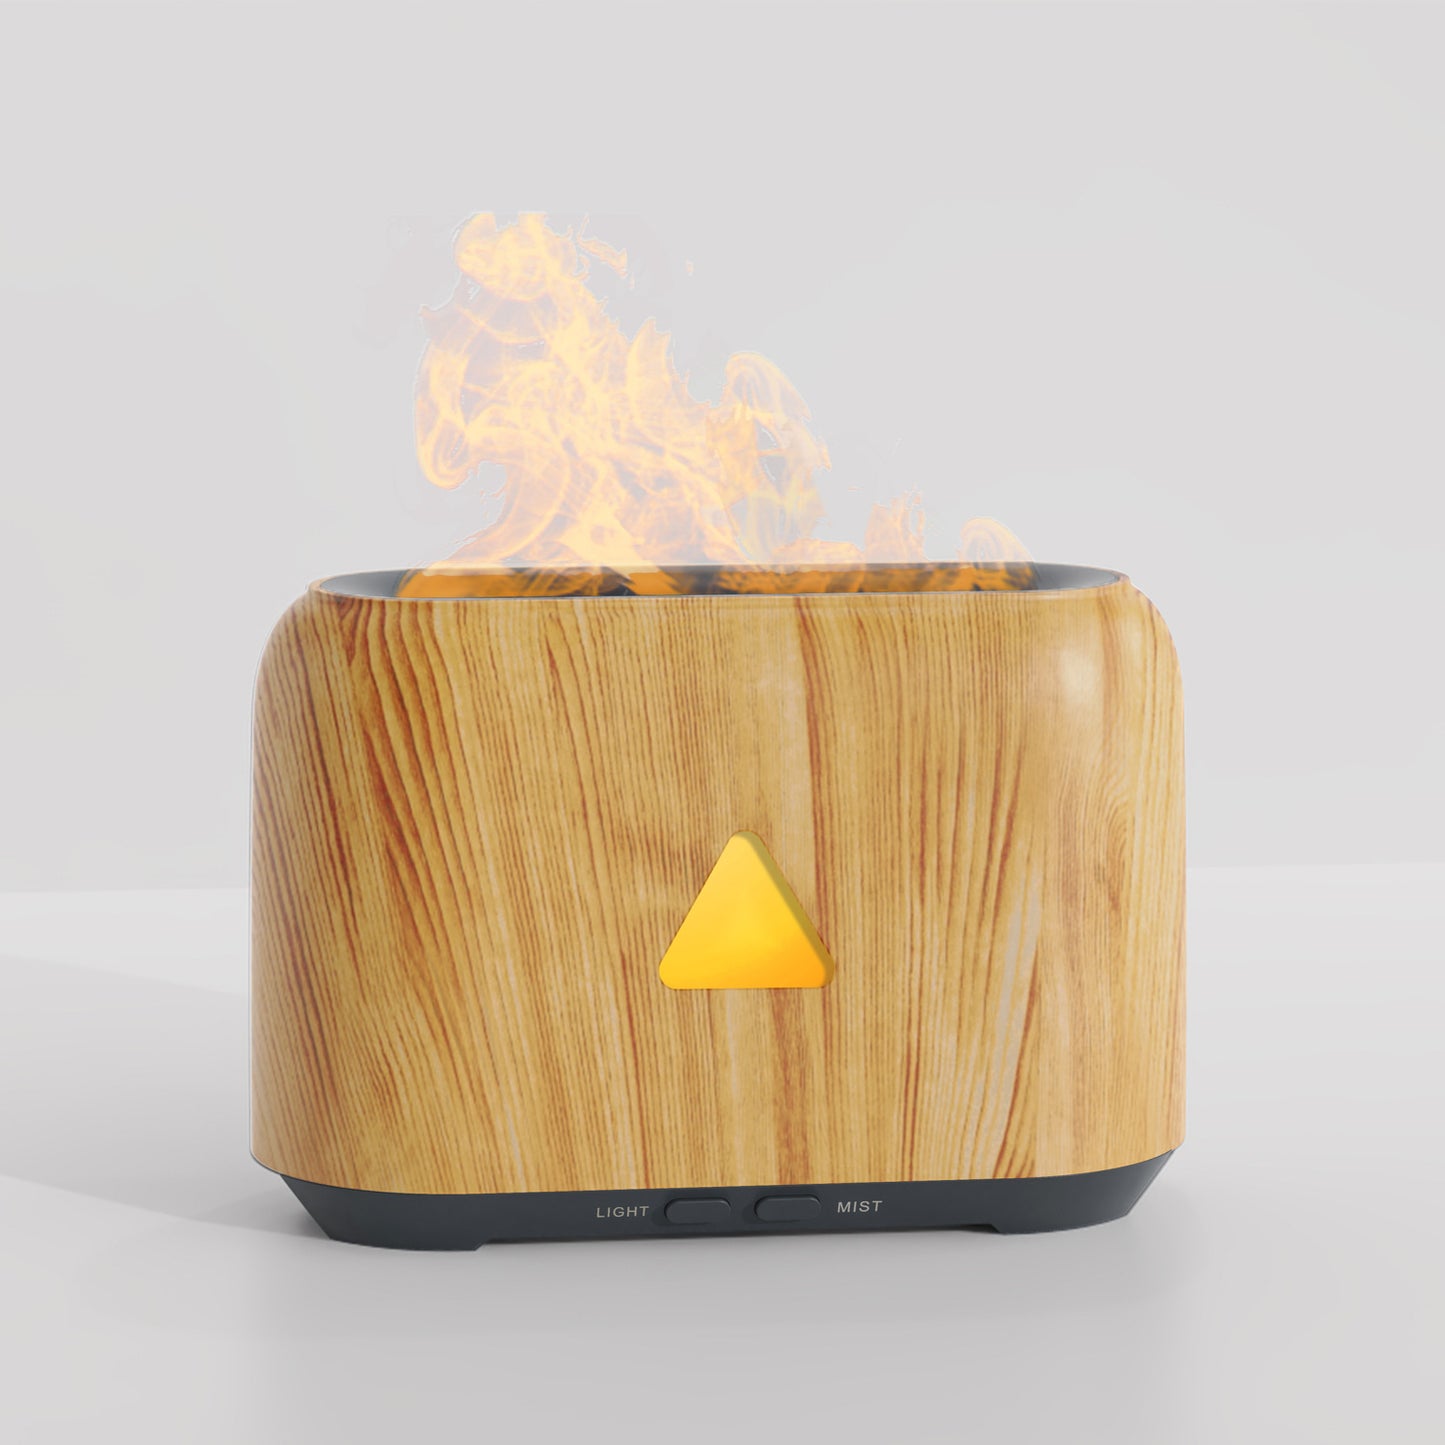 150ml Wood Grain Aroma Diffuser 5V Hollow Flame Humidifier Flame Atmosphere Light USB Volcano Aroma Diffuser